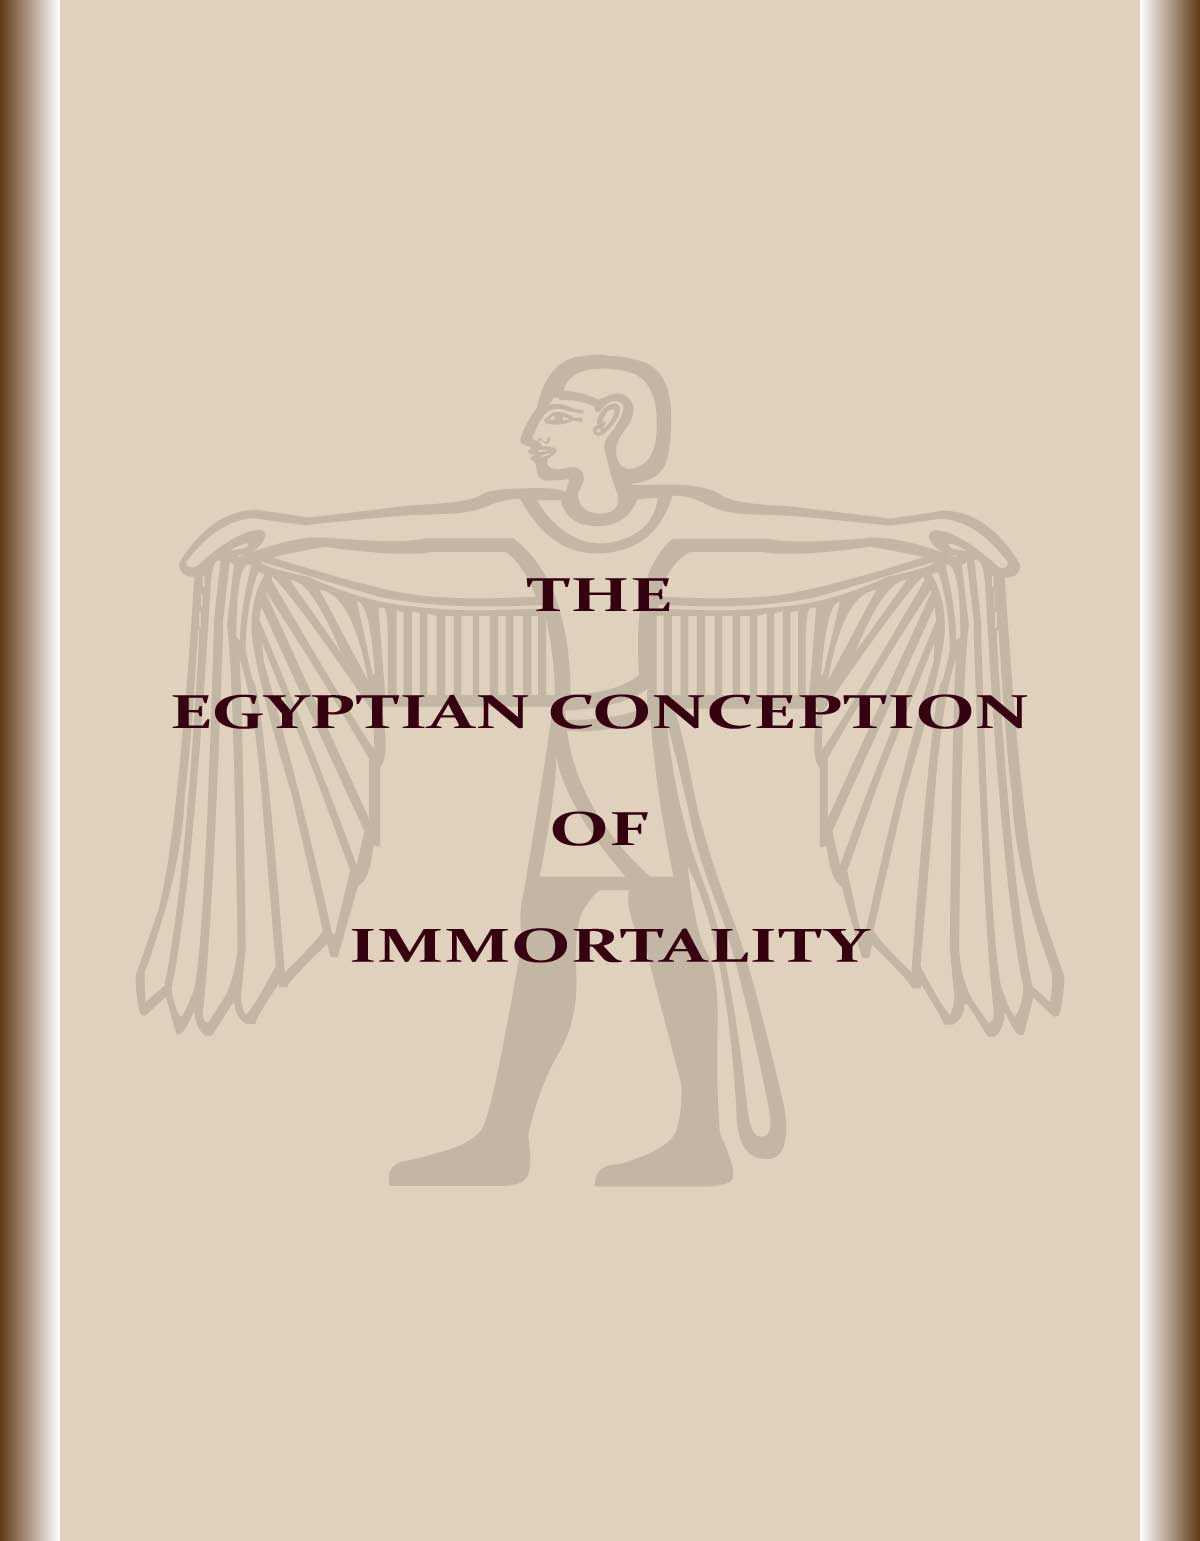 The-Egyptian-conception-of-immortality-book-cover